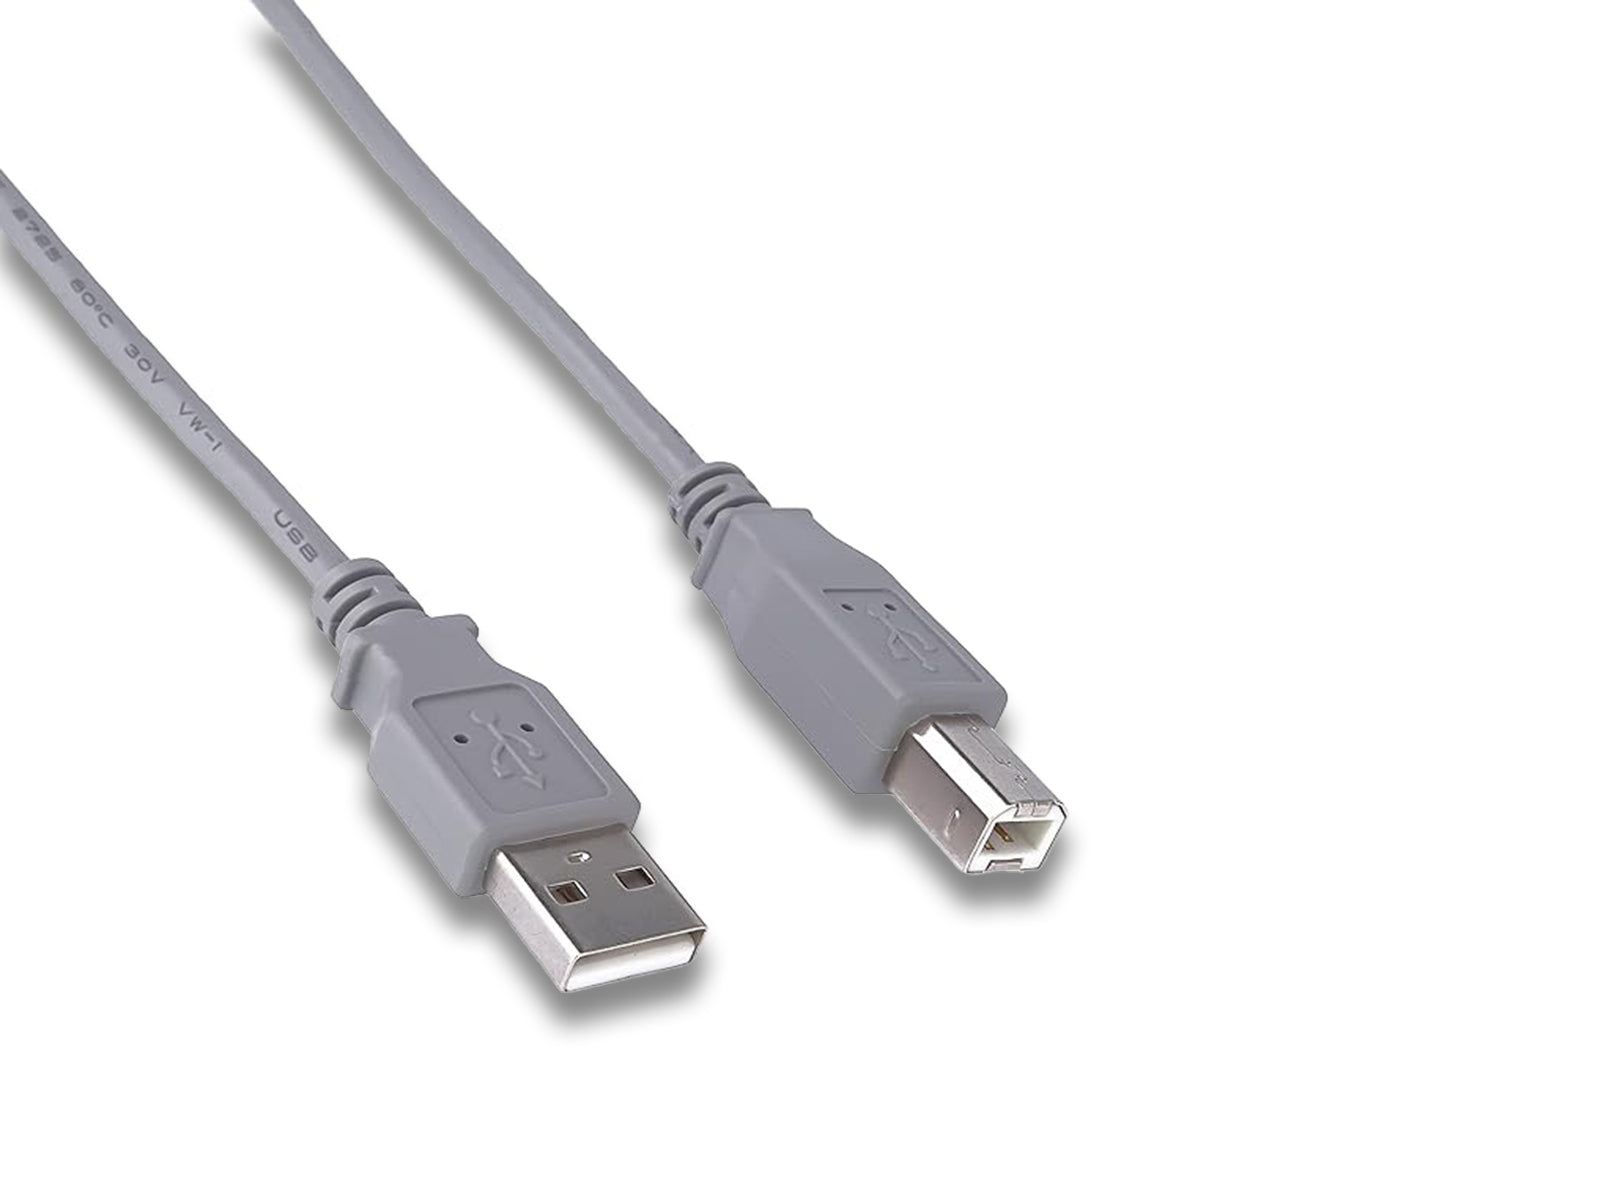 Image shows connectors of printer cable on white background